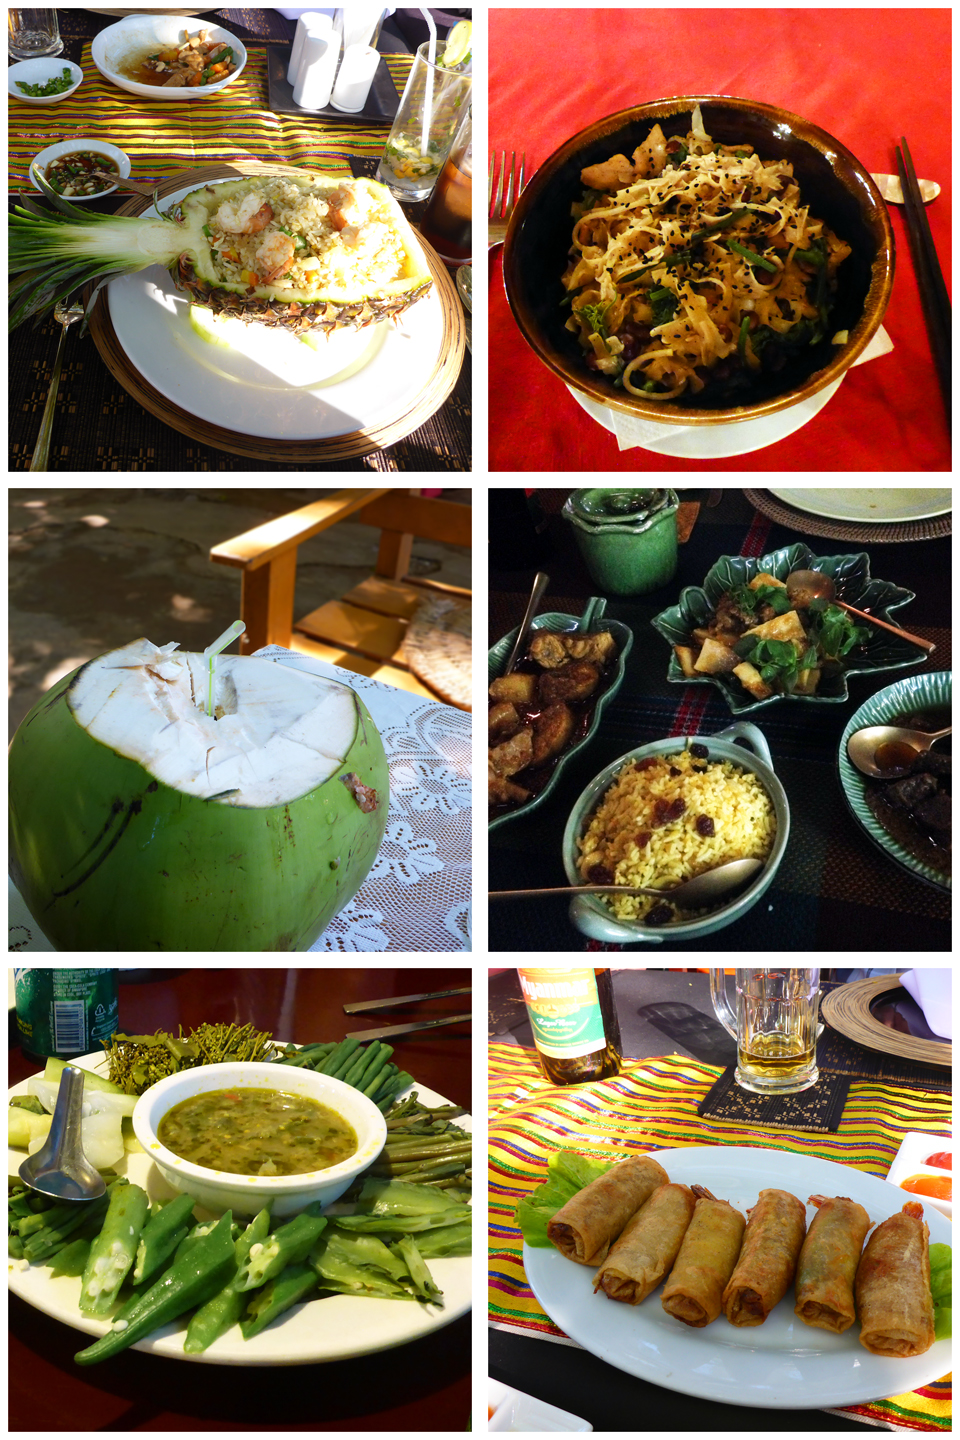 The delicious food of Myanmar. Oh, the food! Why isn't all food served in hollowed out fruit?